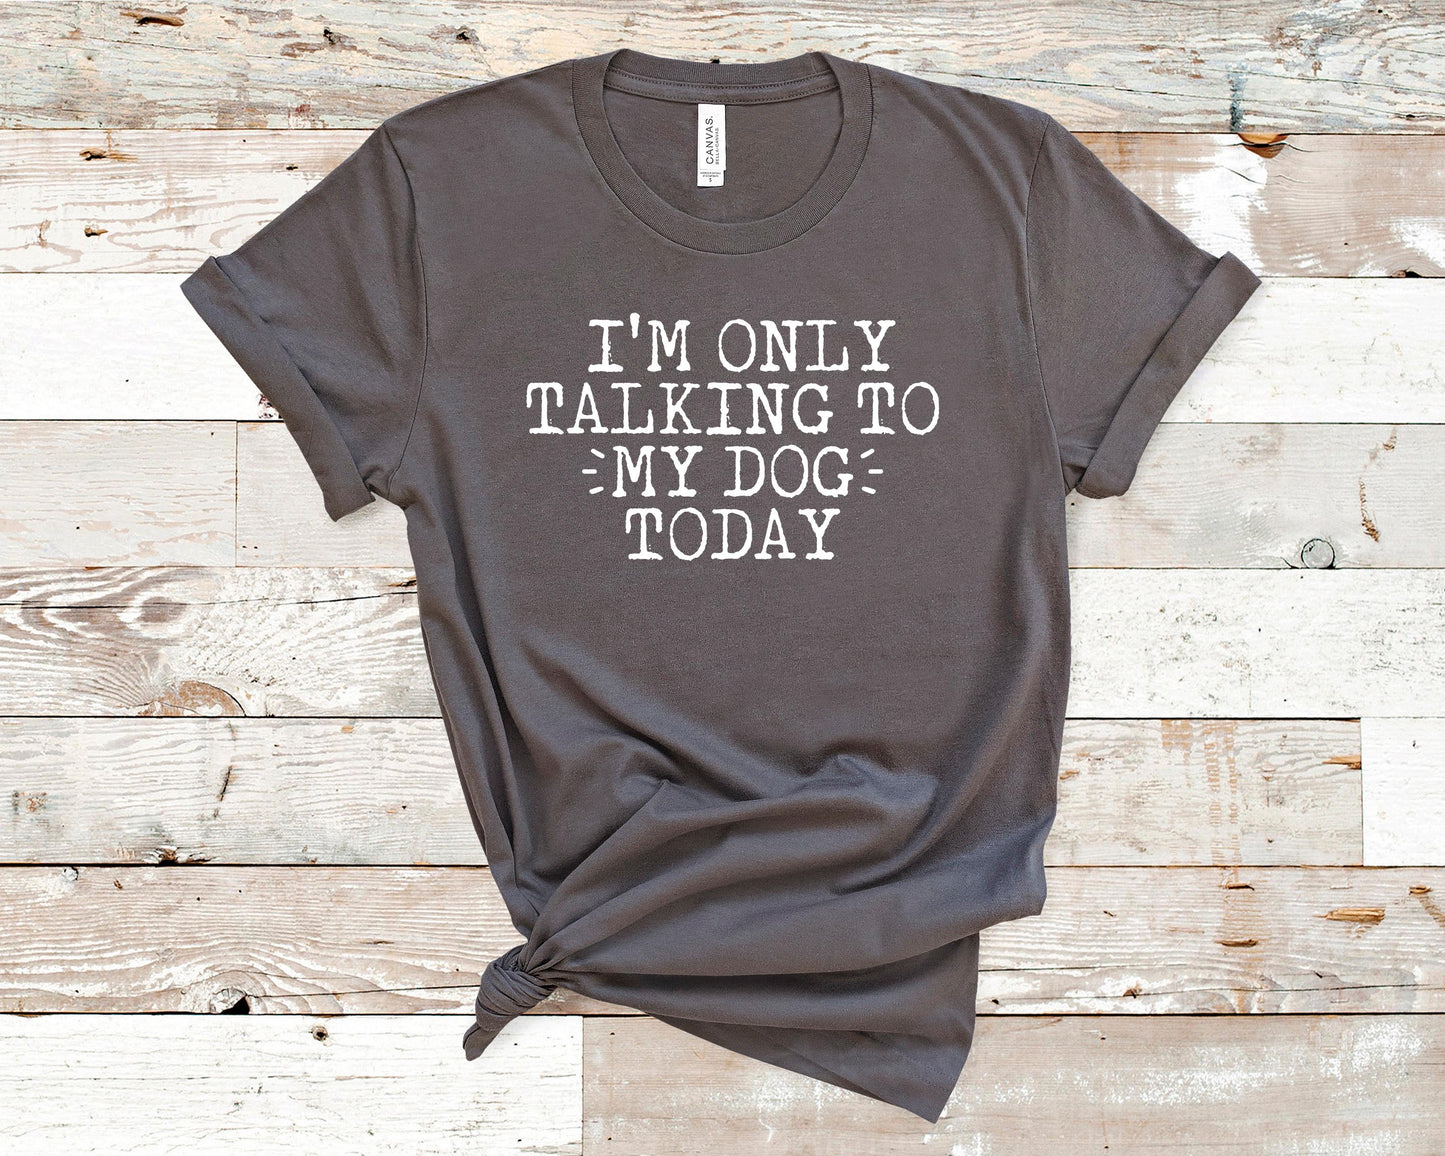 I'm Only Talking to My Dog Today - Pet Lovers Shirt